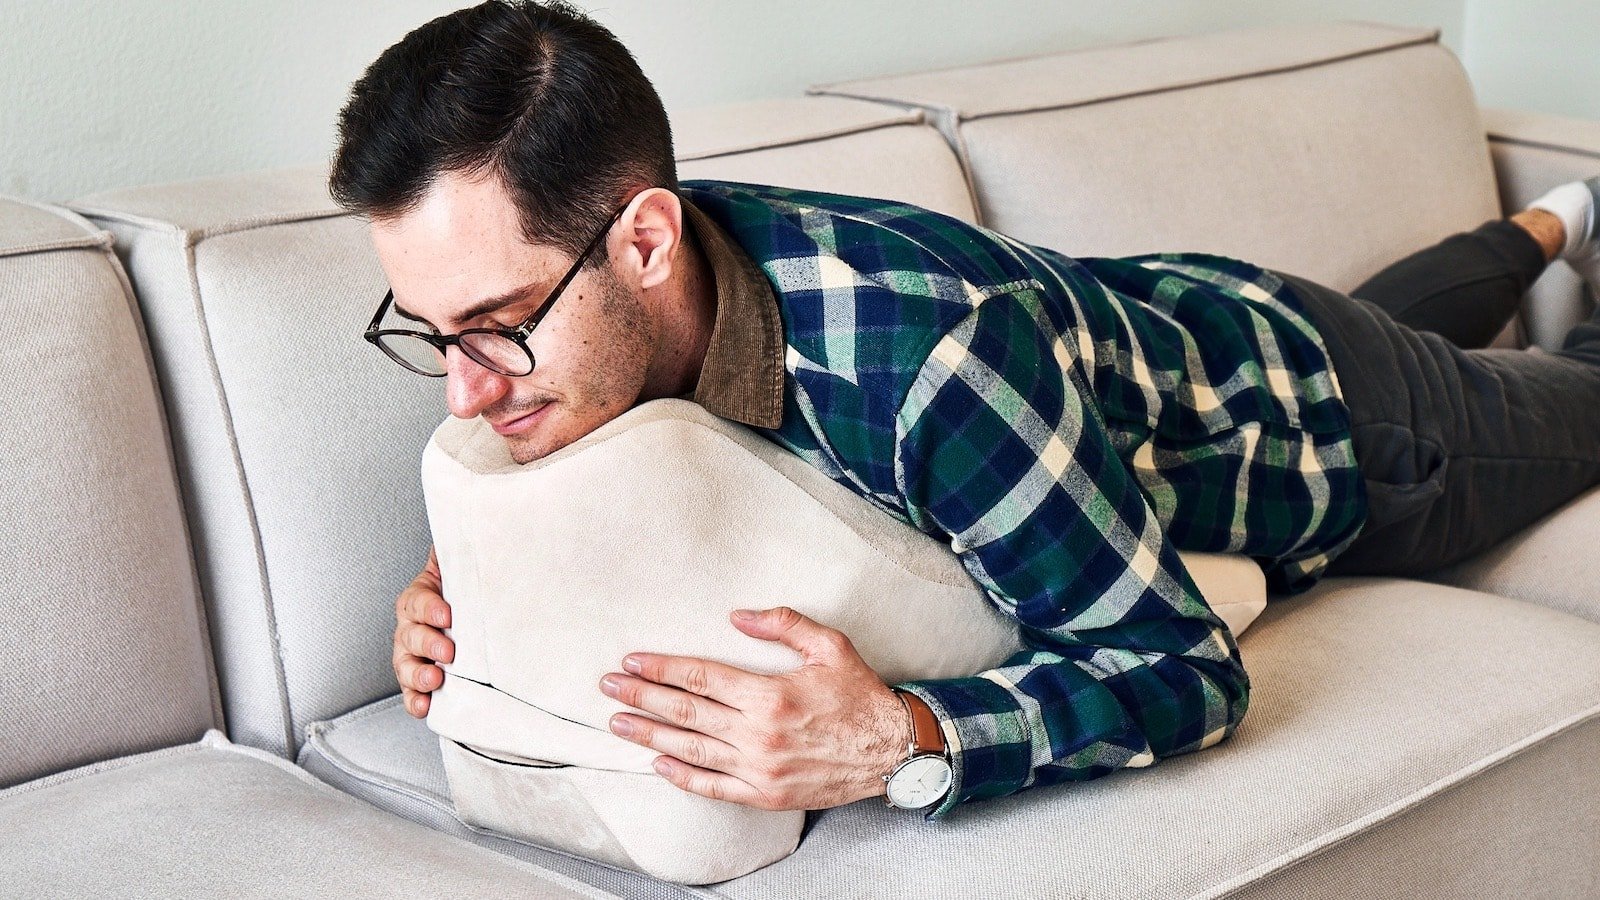 Prone Cushion ergonomic cushion is designed from the ground up for when you’re lying down